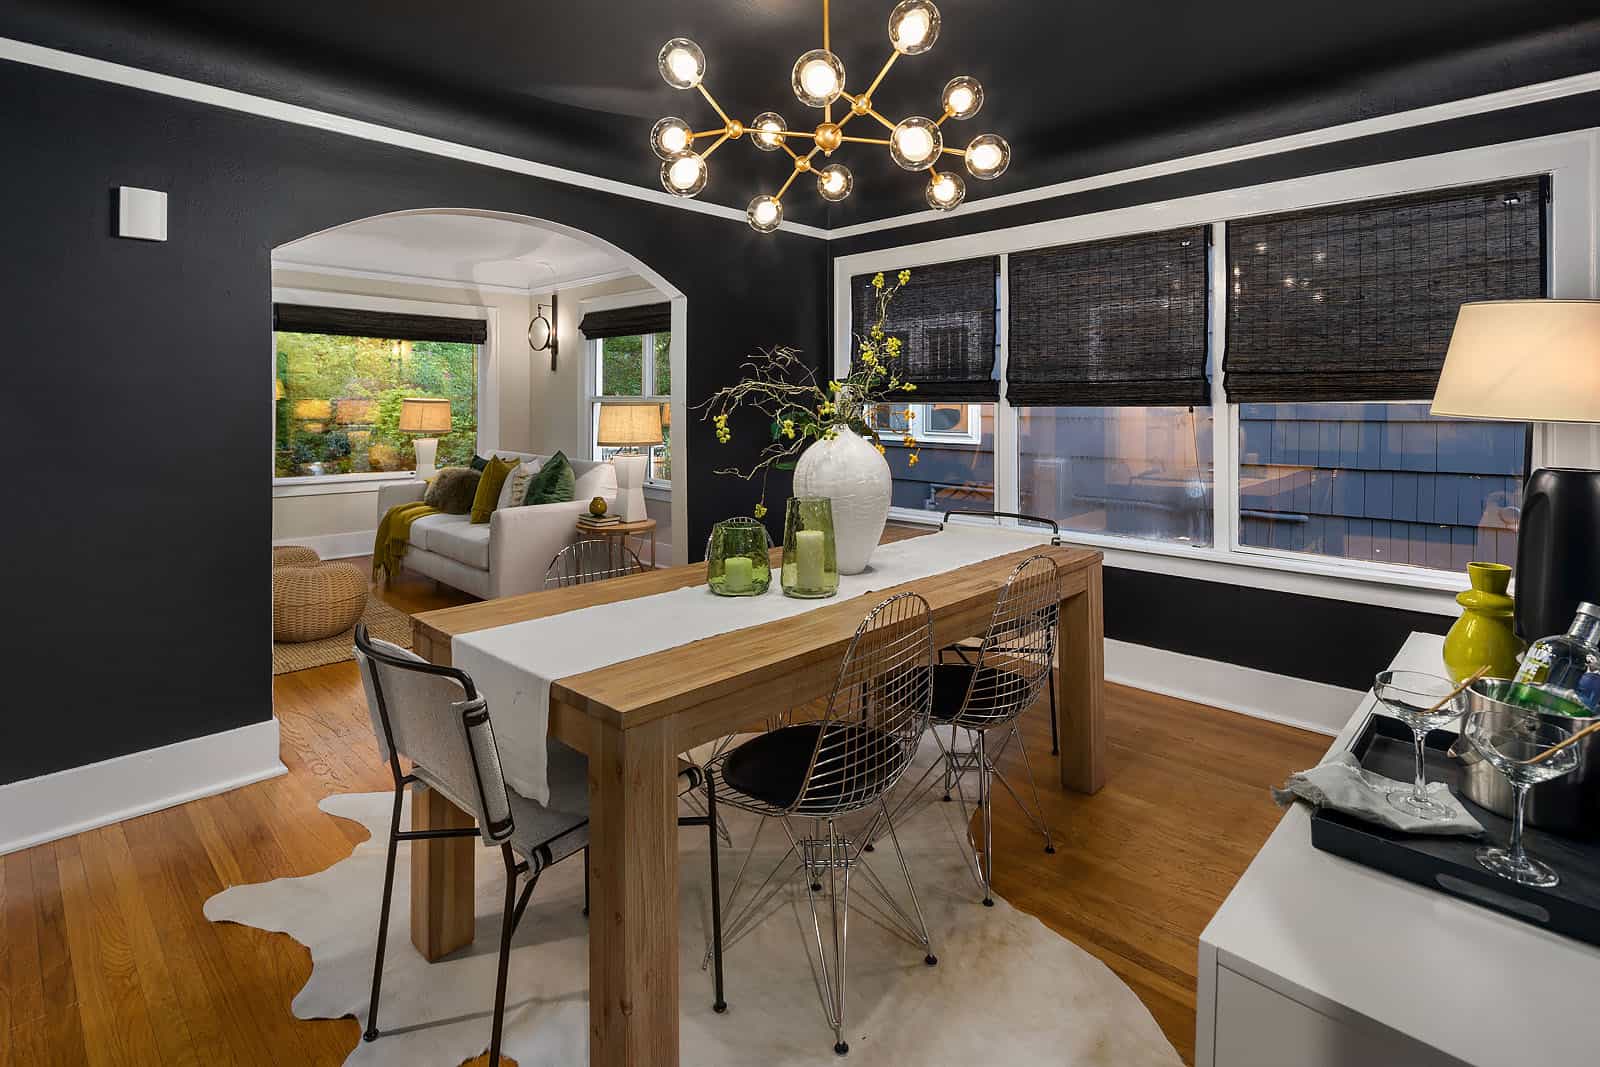 staged craftsman home with black walls in an eclectic style